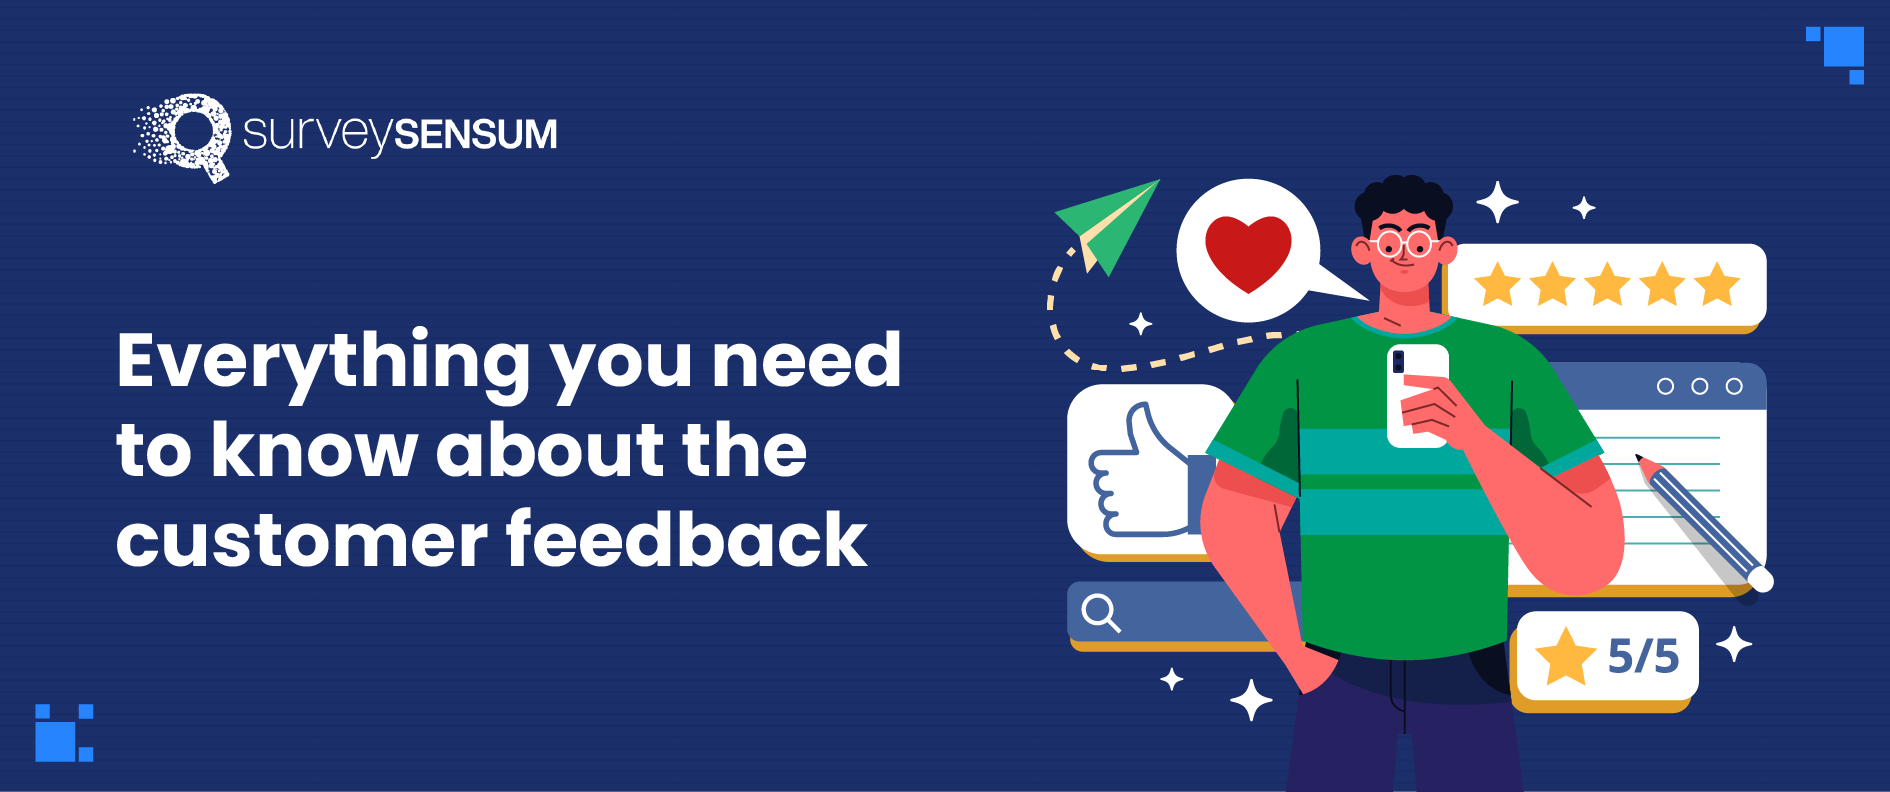 Everything you need to know about customer feedback